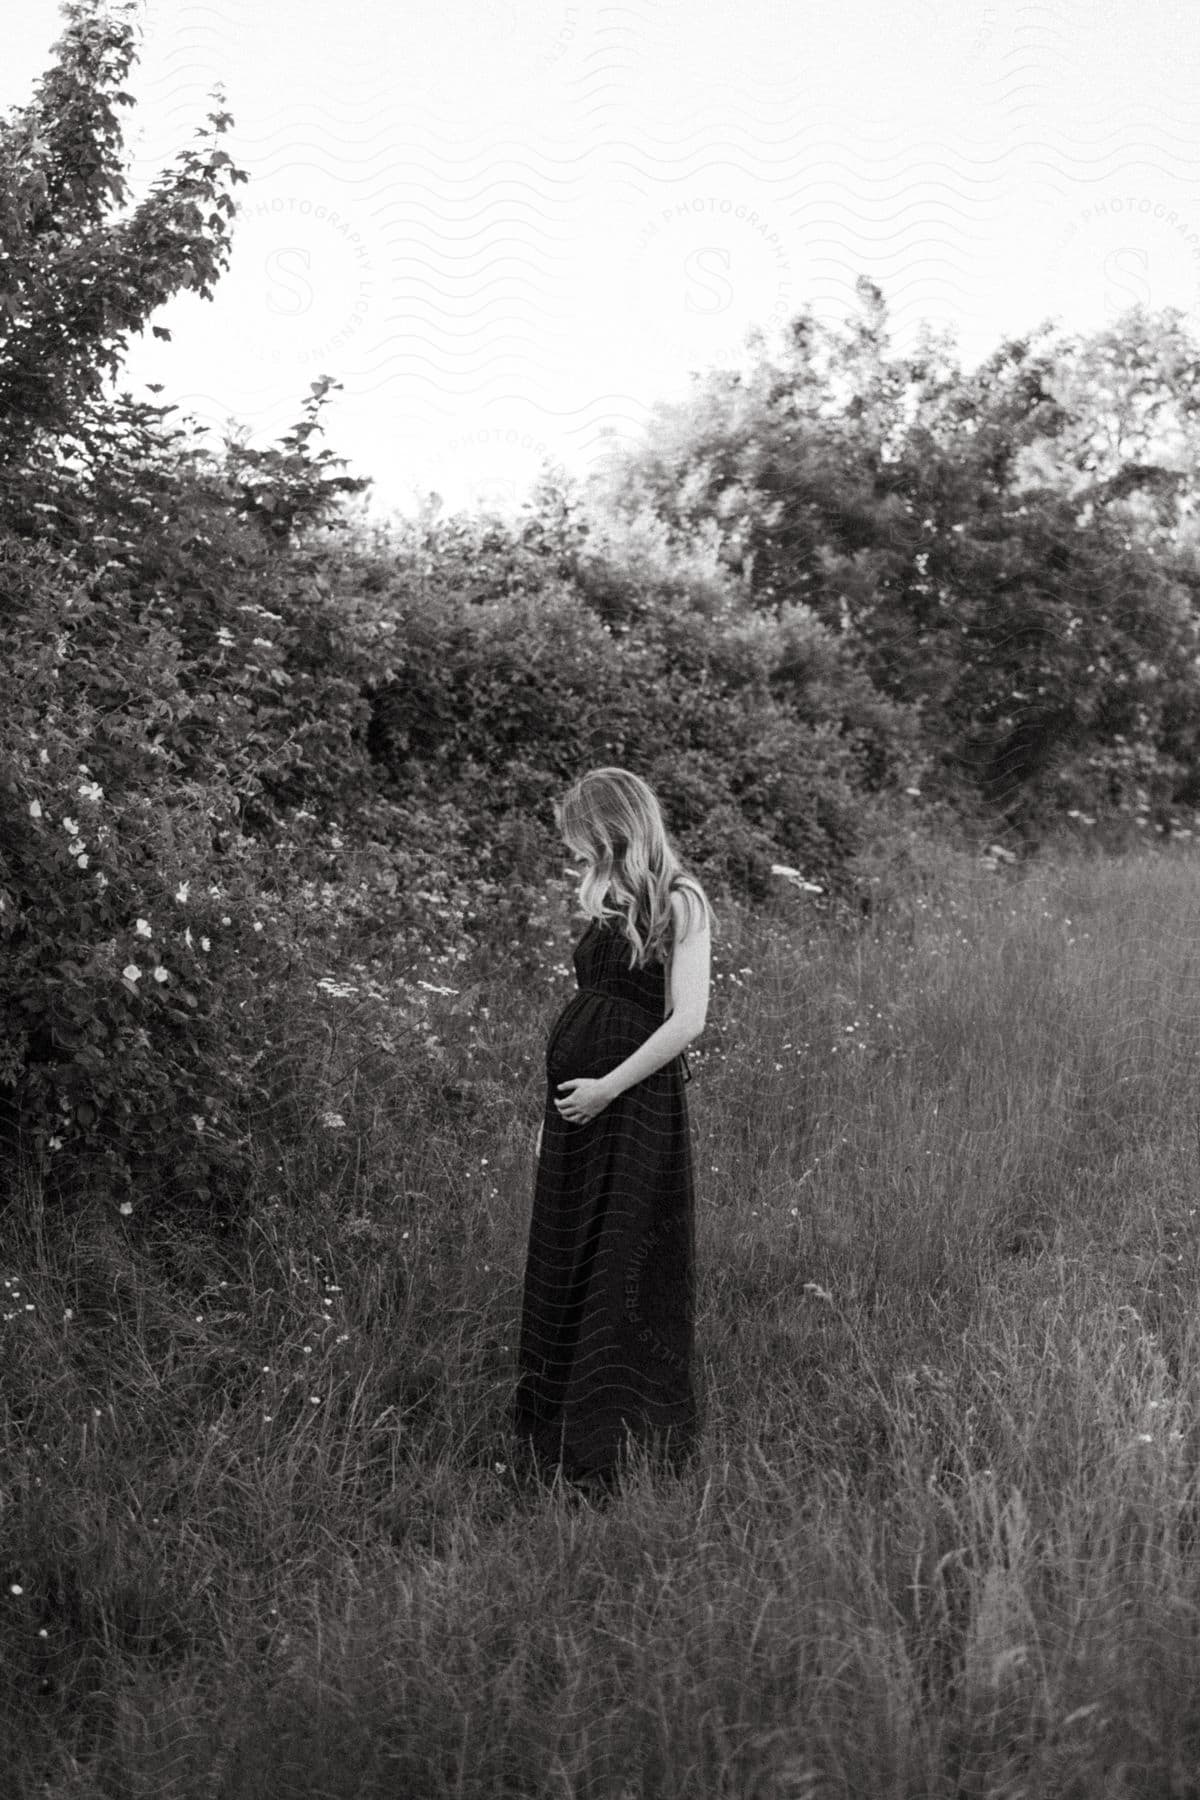 A pregnant woman in a black dress is holding her belly while looking down in a field with tall grass